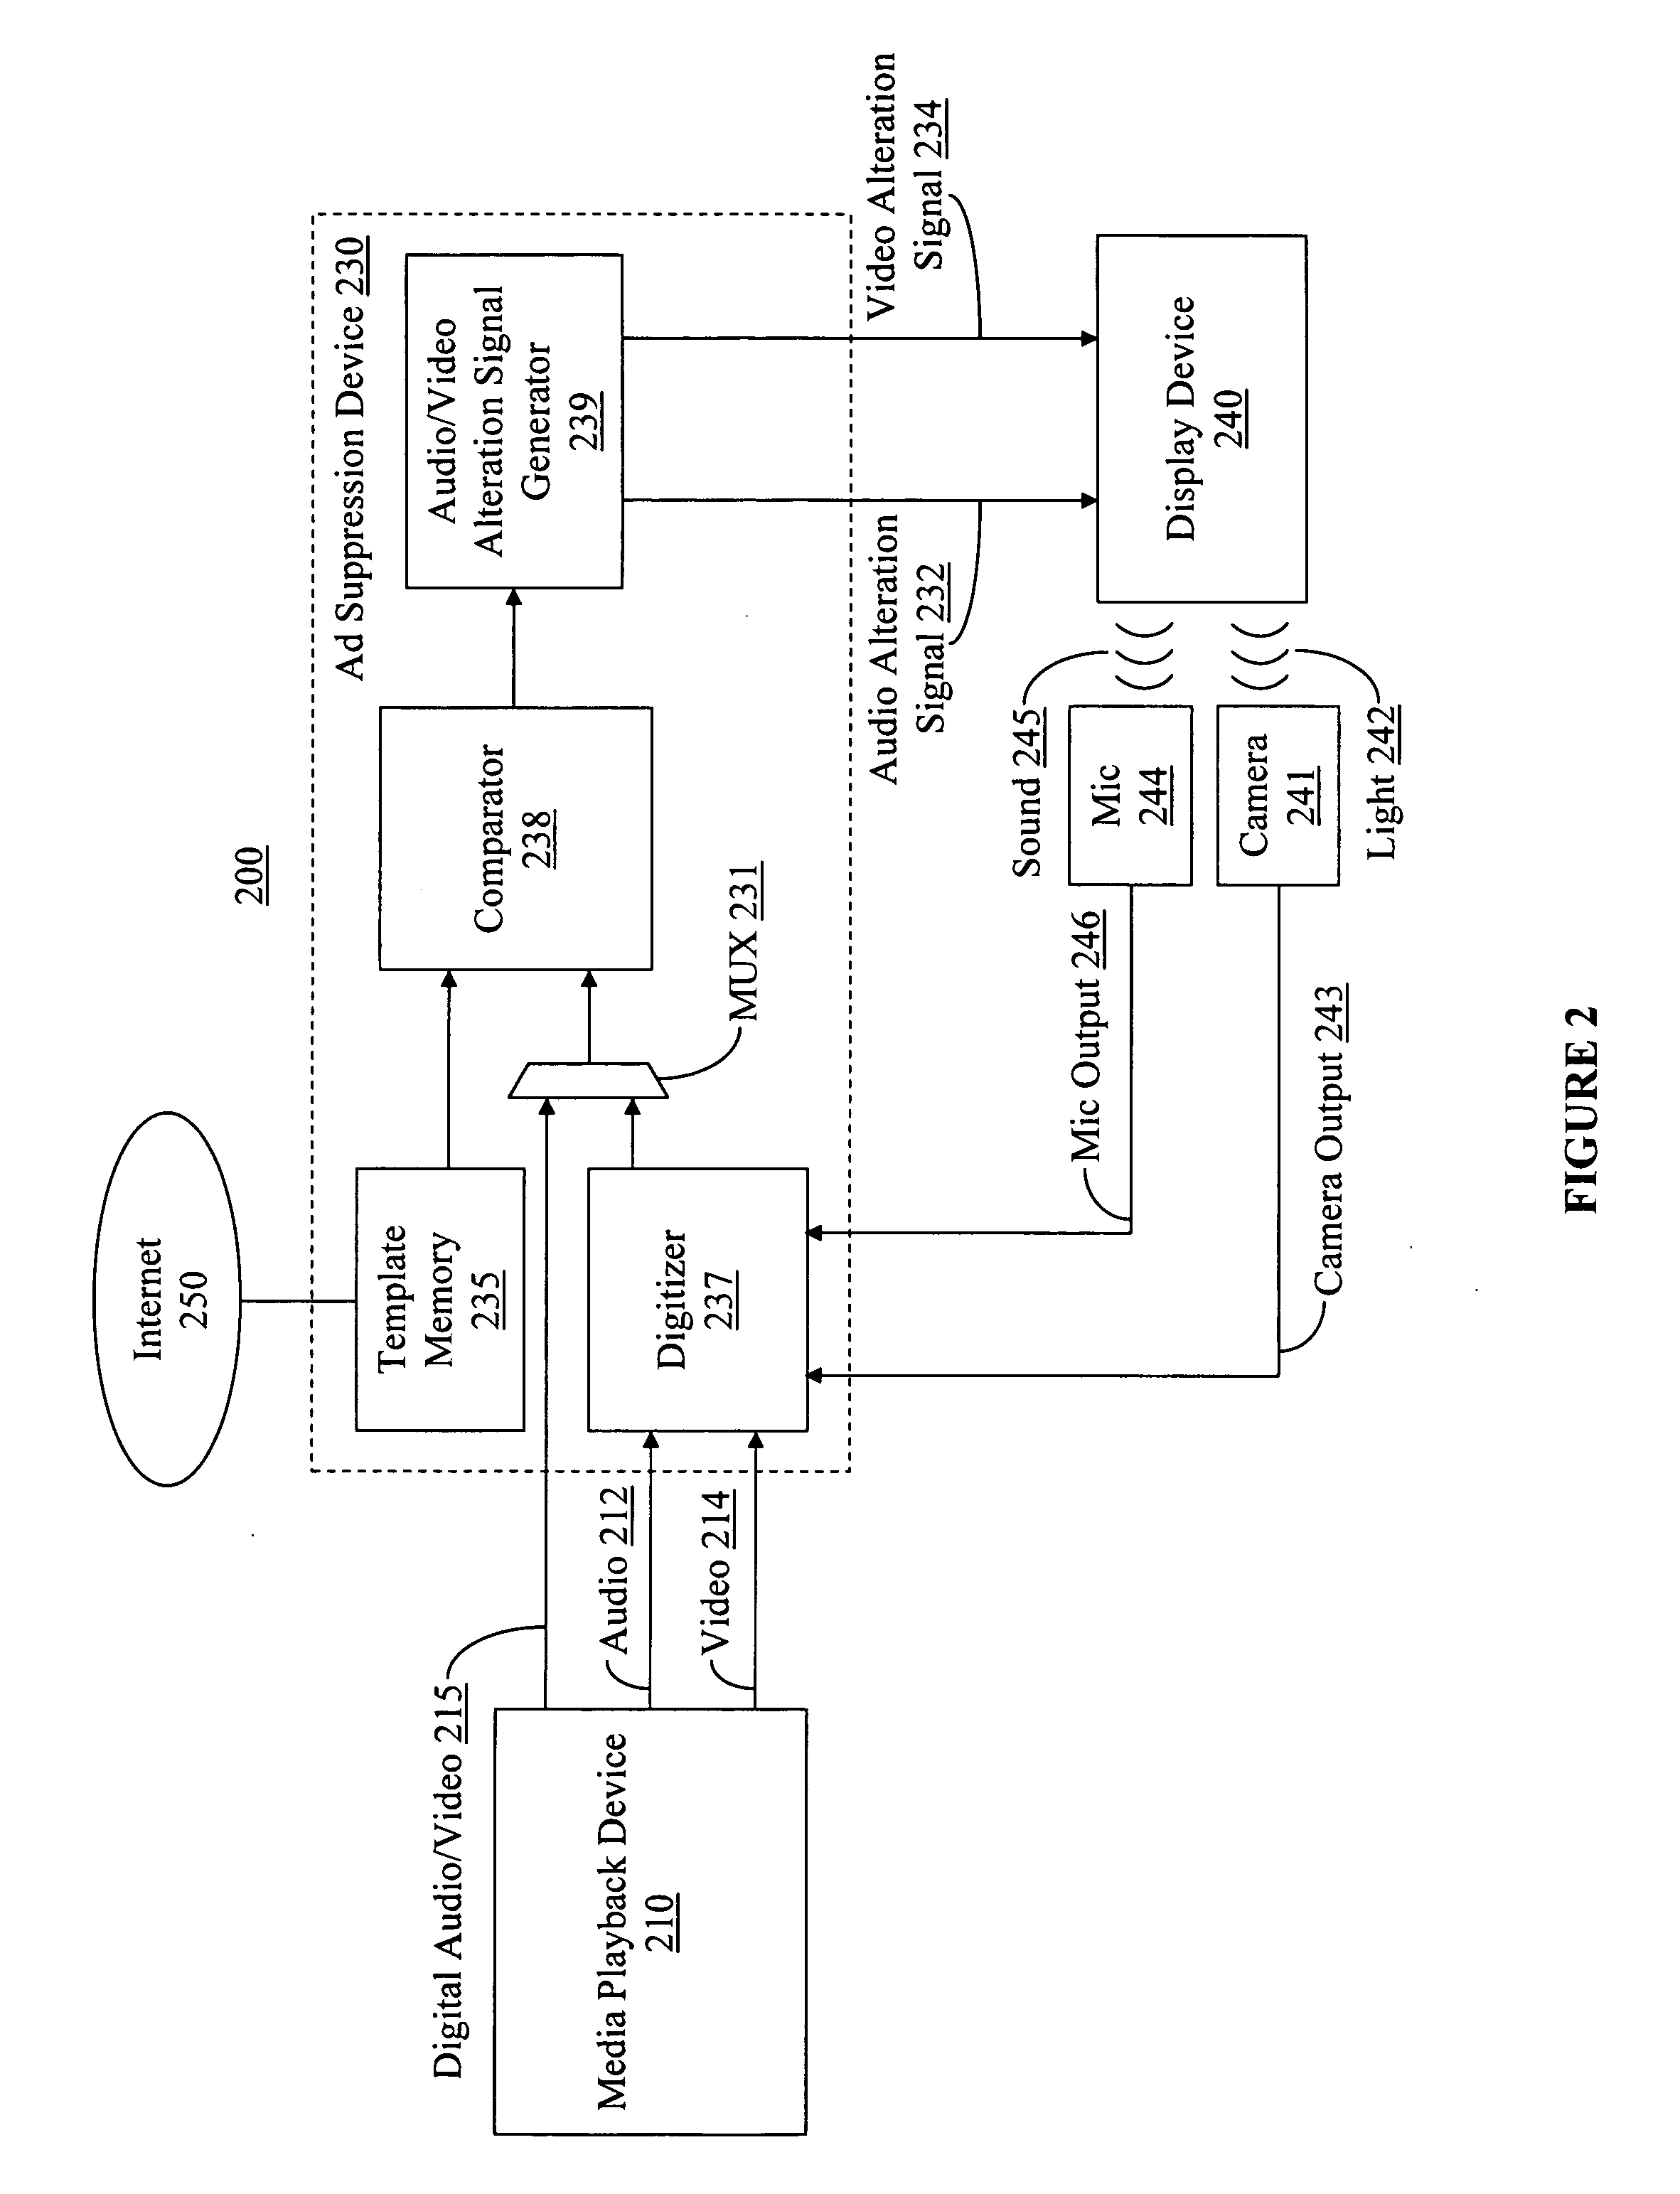 Method and system for altering the presentation of broadcast content